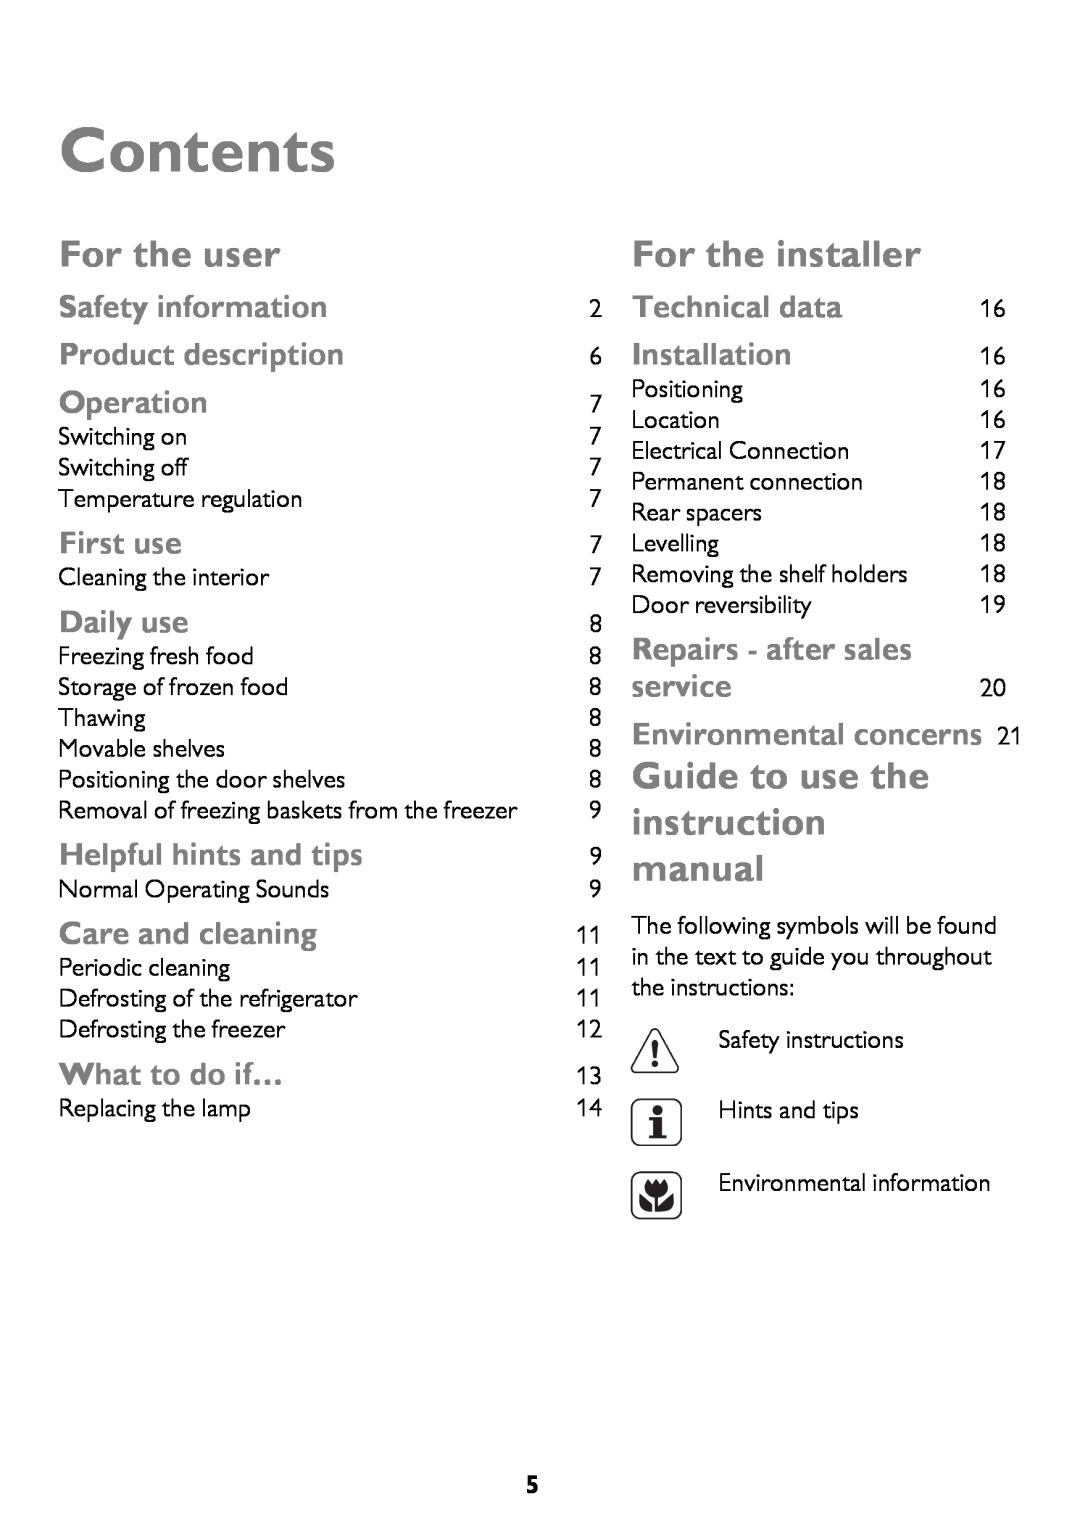 John Lewis JLFFW175, JLFFIN175 Contents, For the user, For the installer, Guide to use the, instruction, manual 